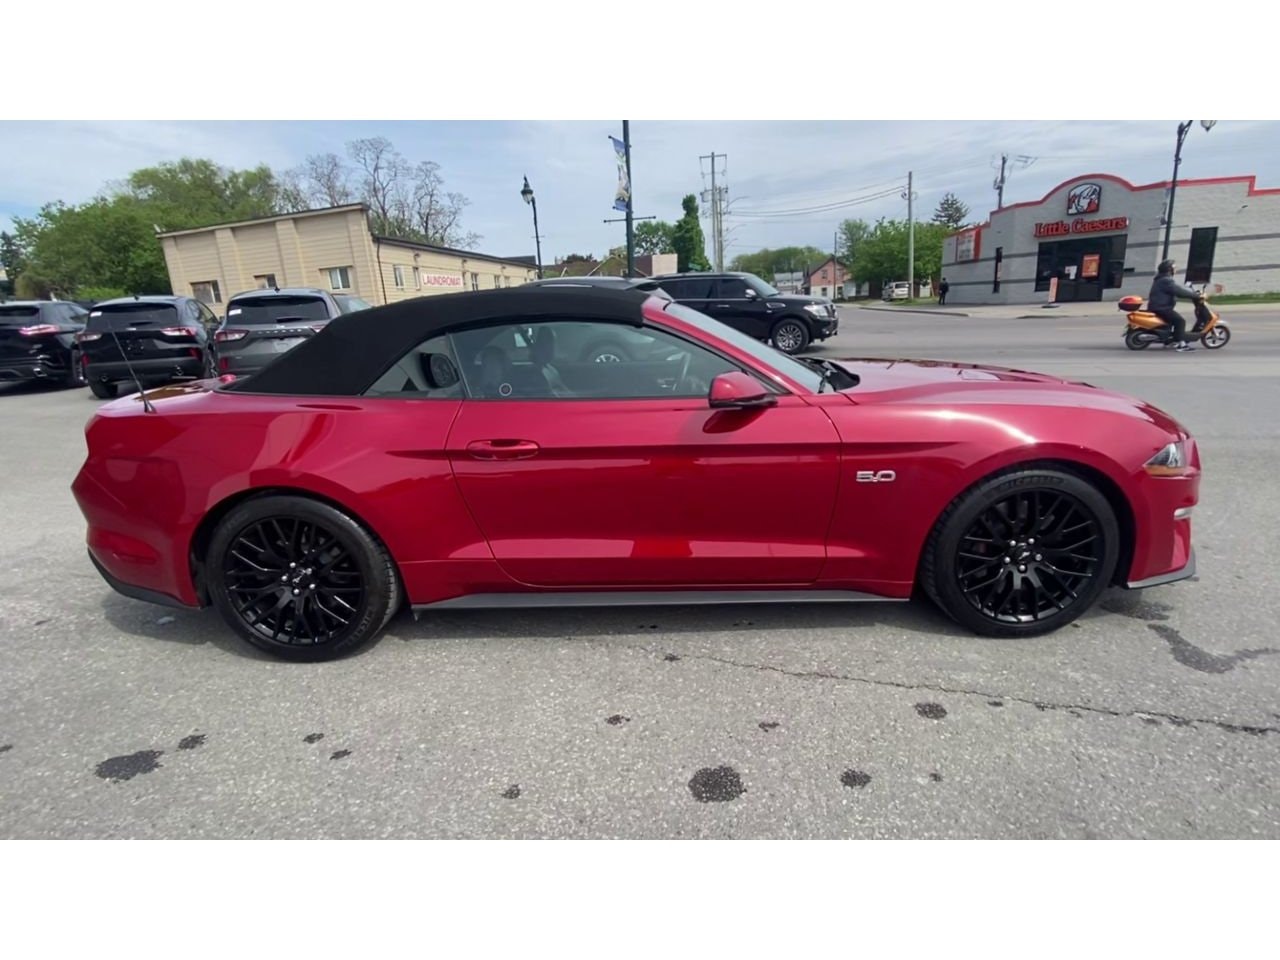 2020 Ford Mustang - P20422 Full Image 9